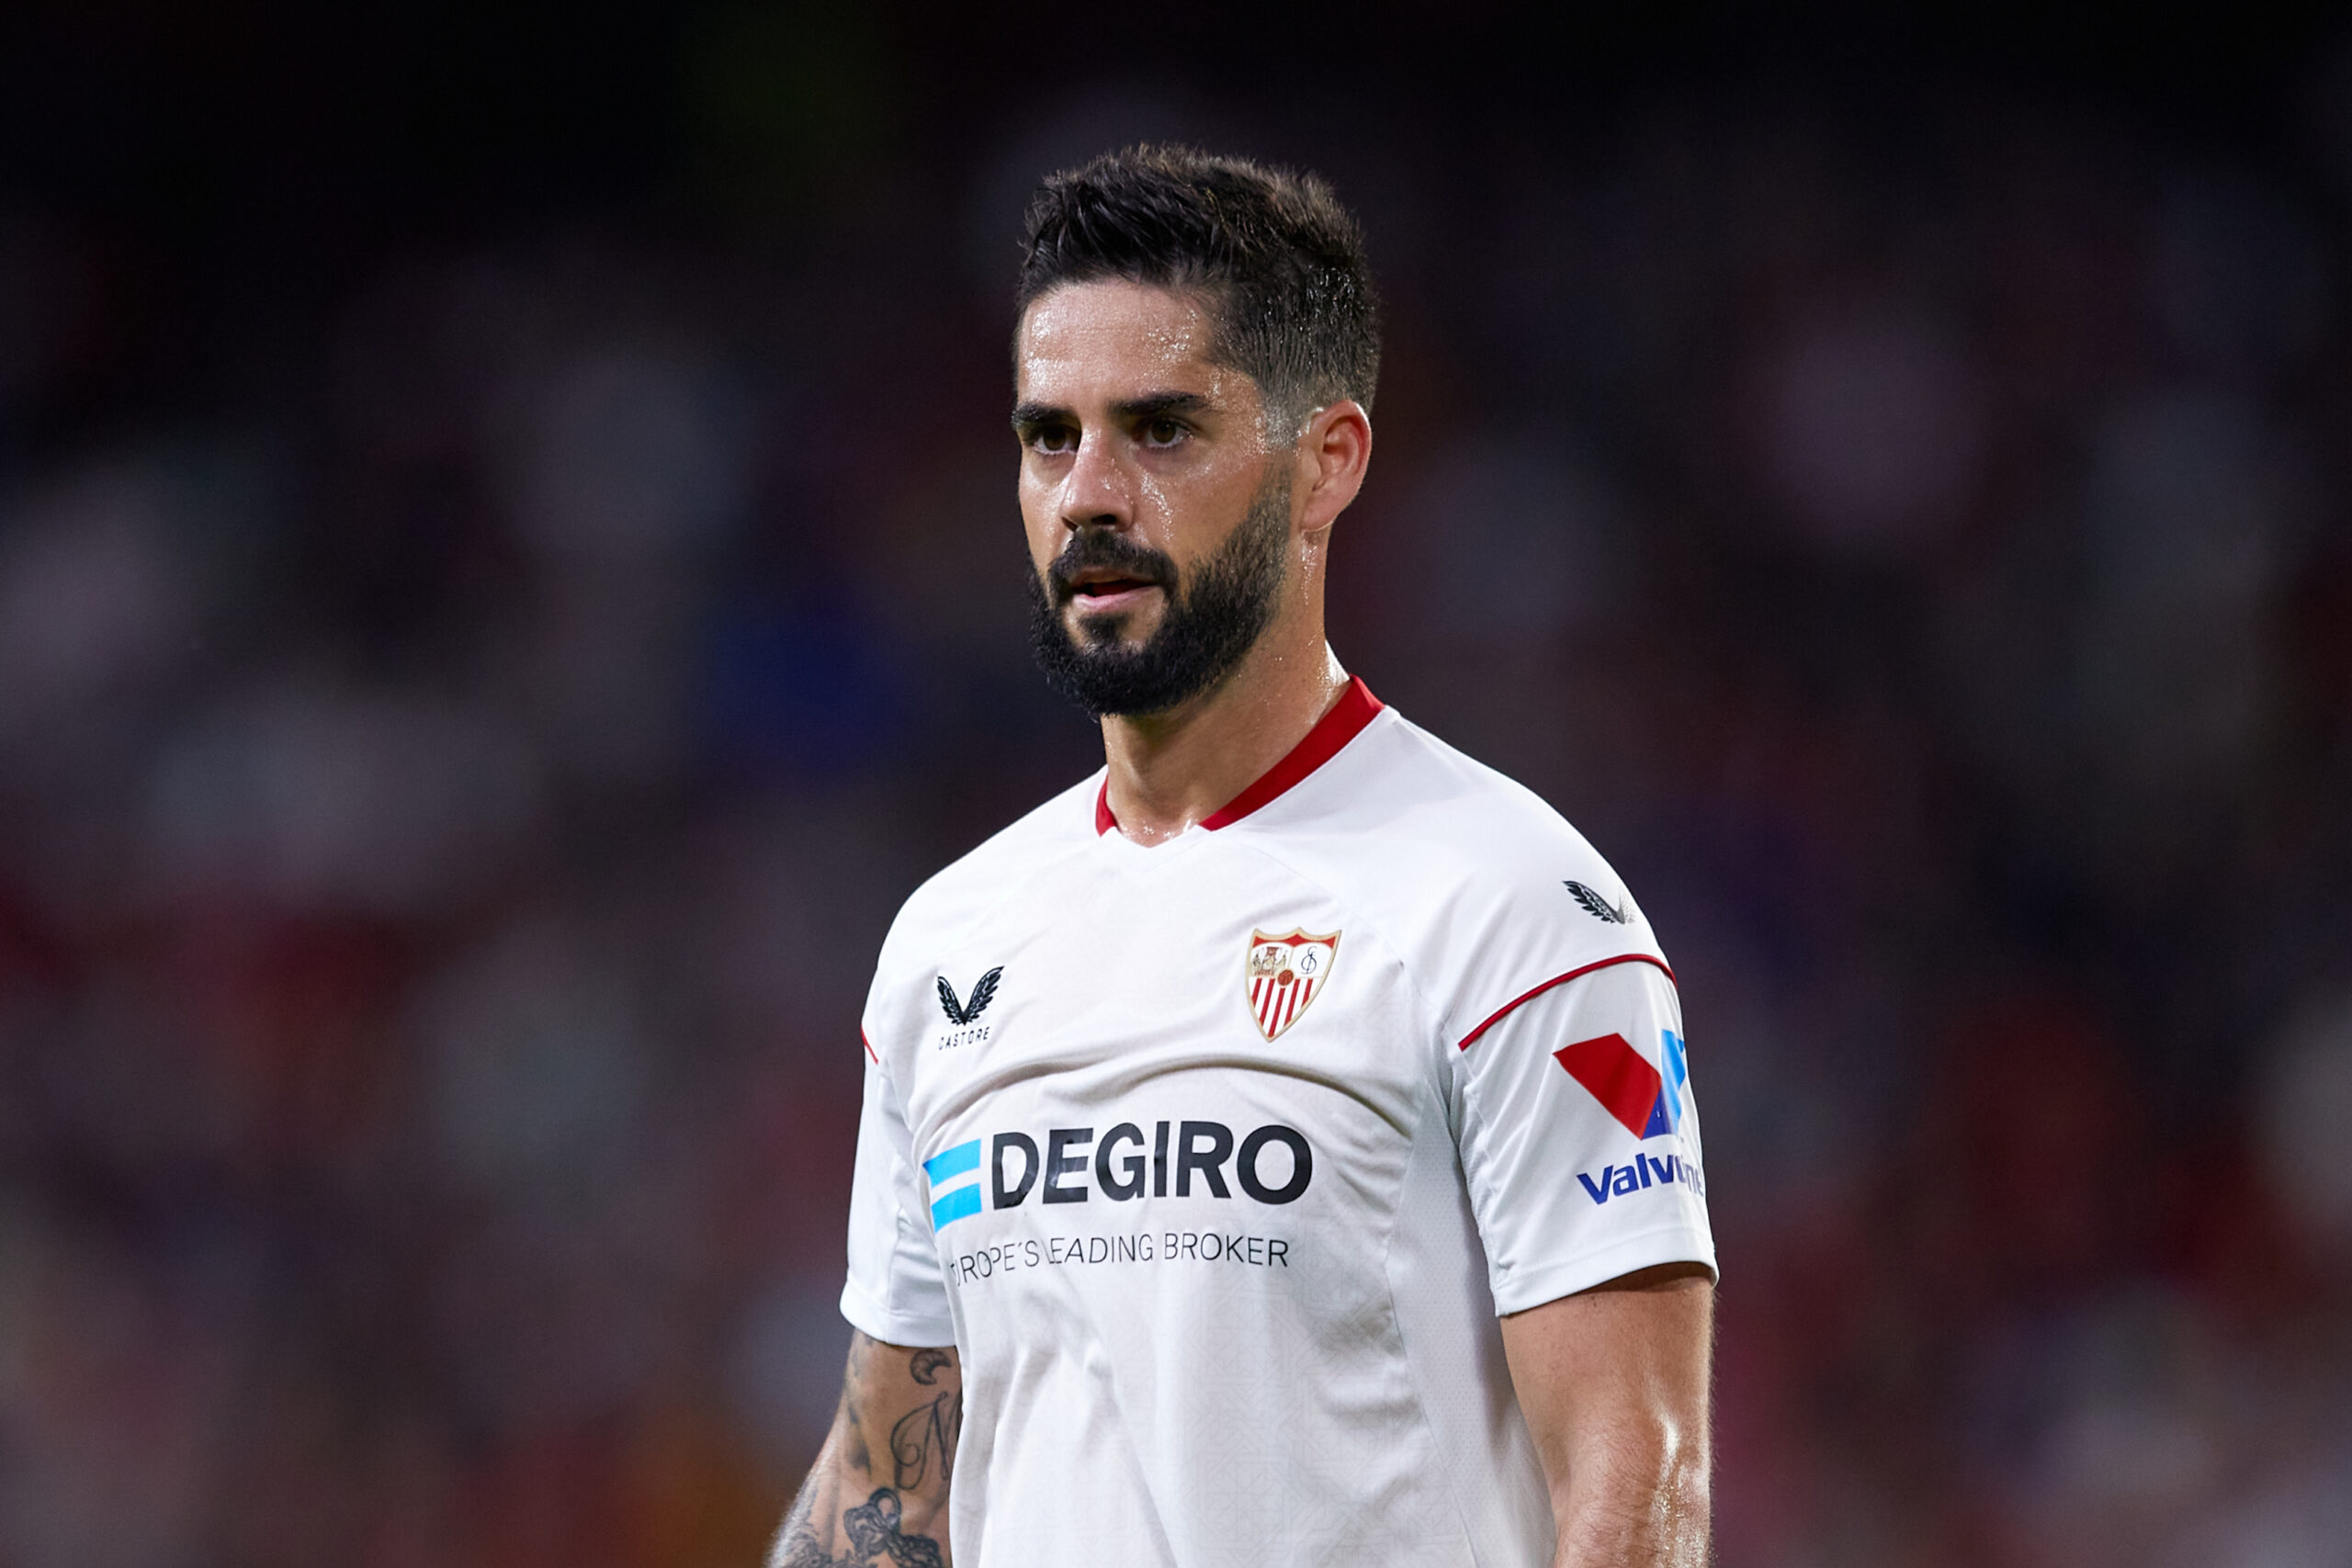 Lazio could turn their attention to Isco if they parted ways with Luis Alberto in January. The former Real Madrid midfielder is currently a free agent.